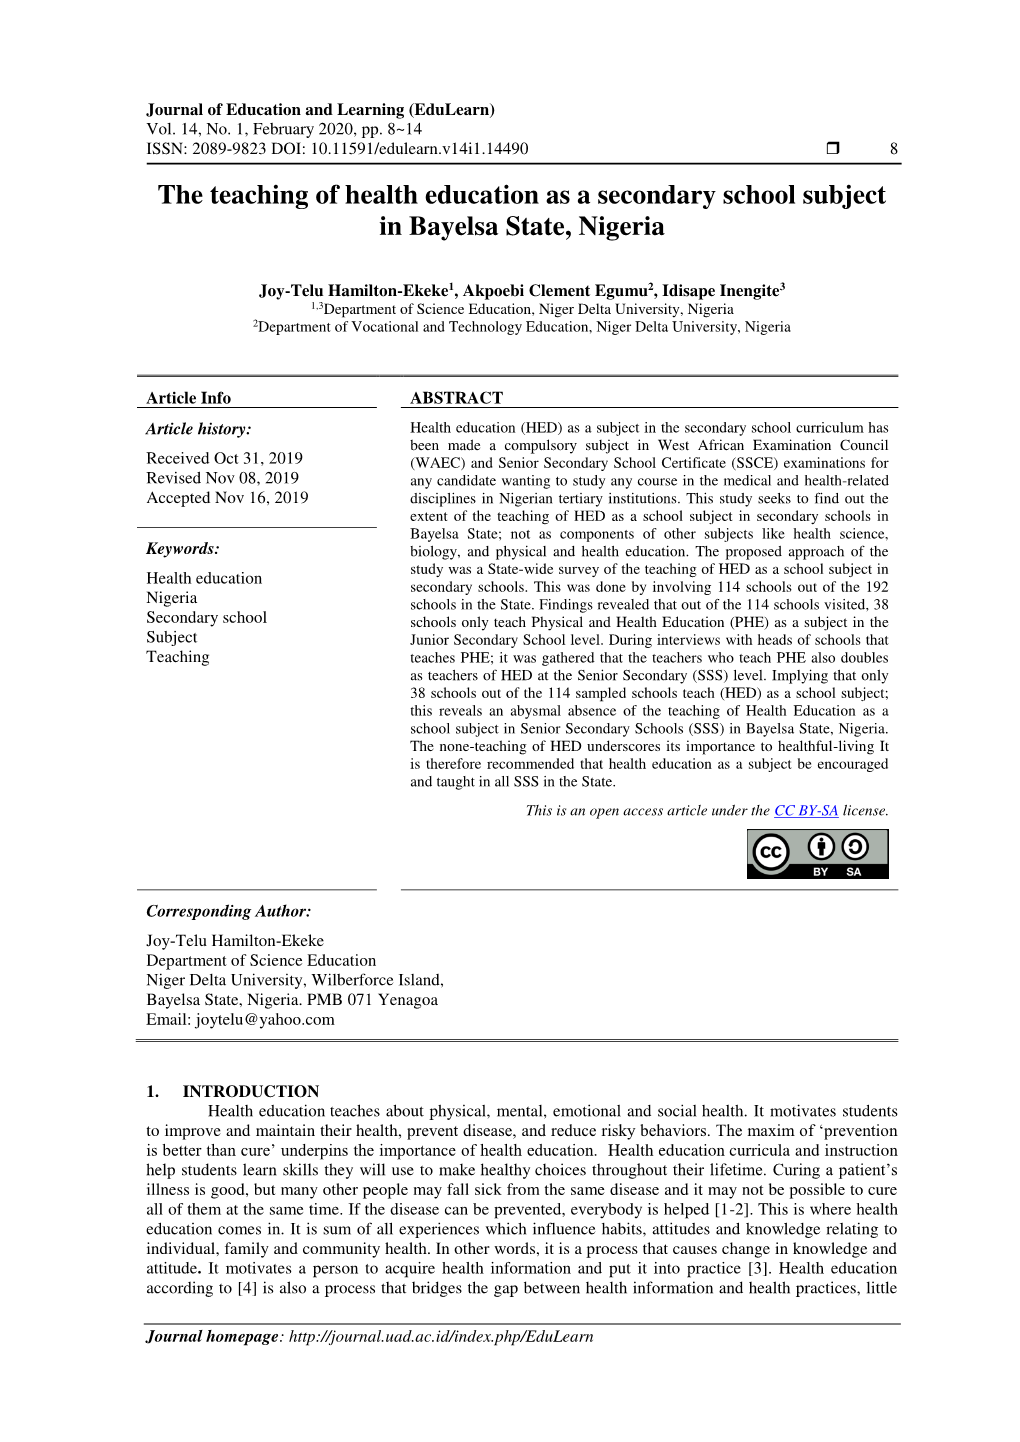 The Teaching of Health Education As a Secondary School Subject in Bayelsa State, Nigeria